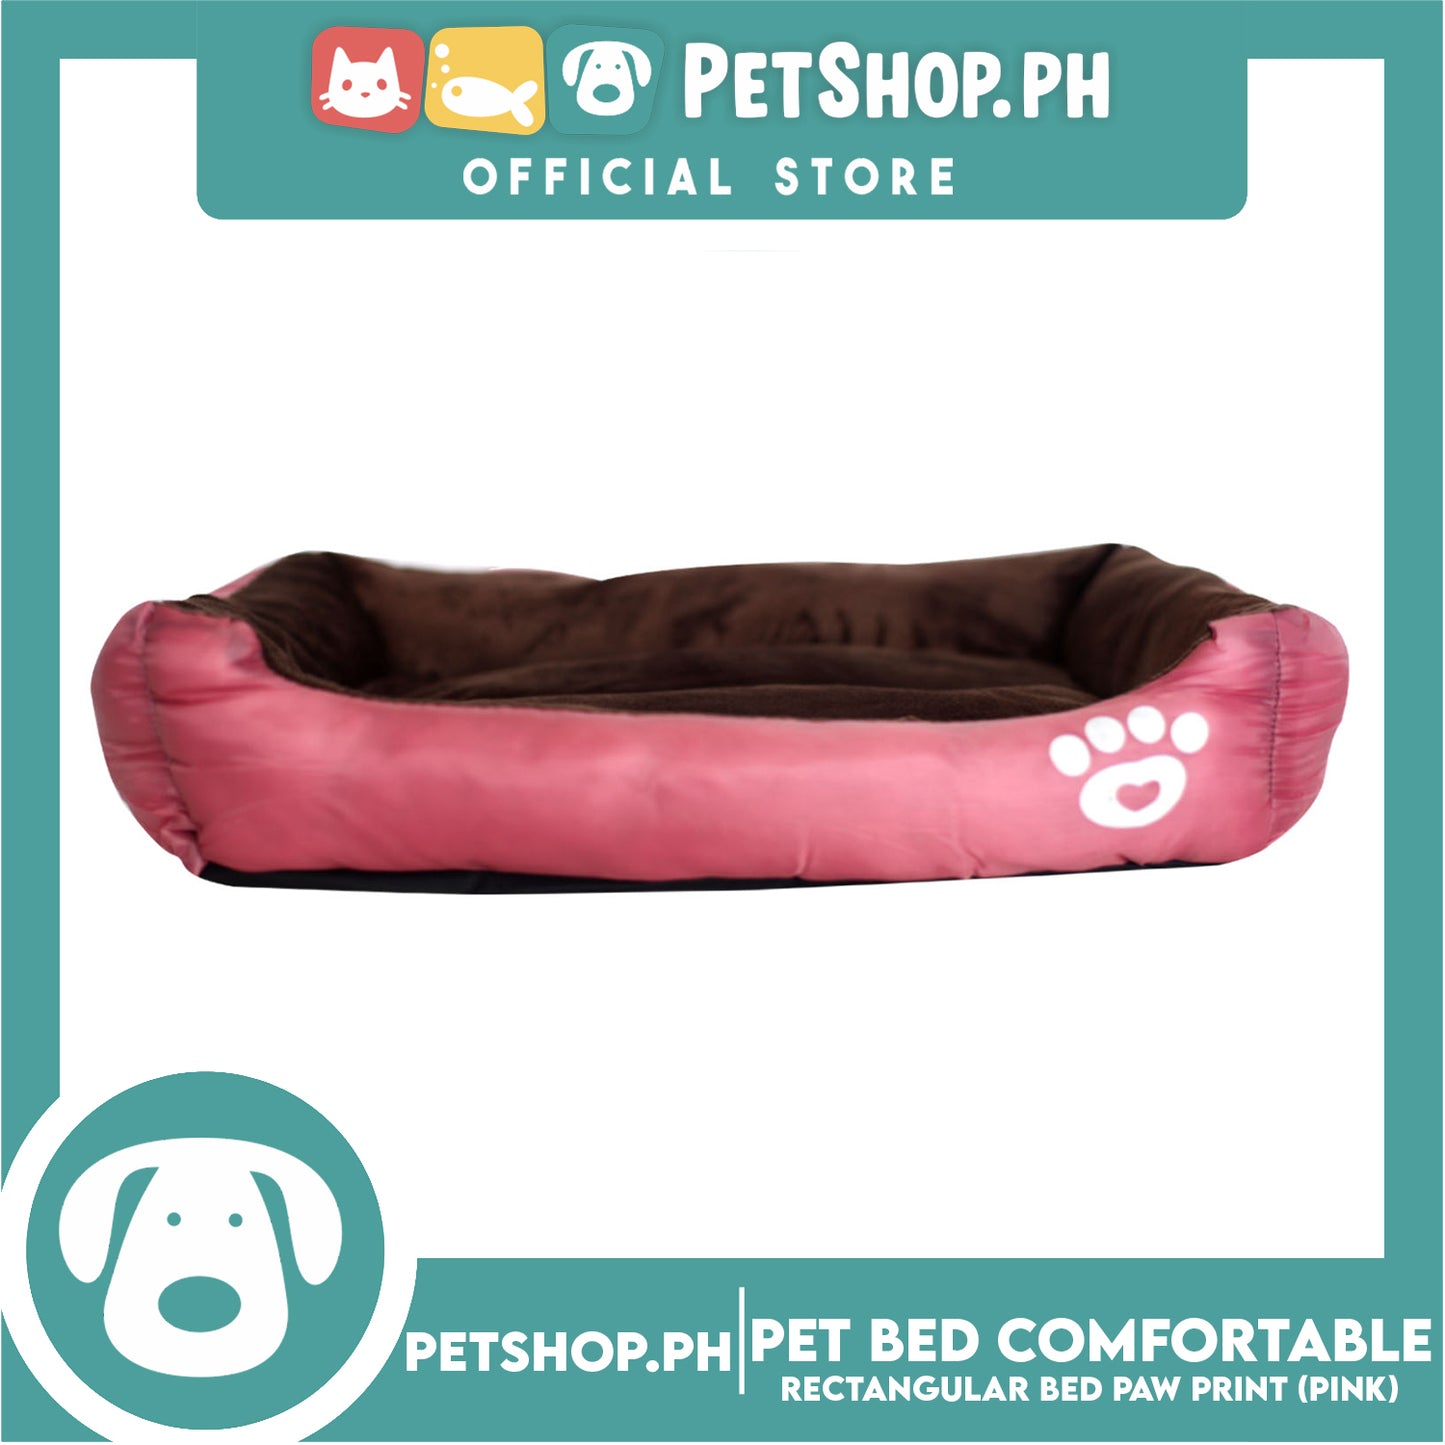 Pet Bed Comfortable Rectangular Pet Bed with Paw Print 62x50x12cm Medium for Dogs & Cats (Pink)